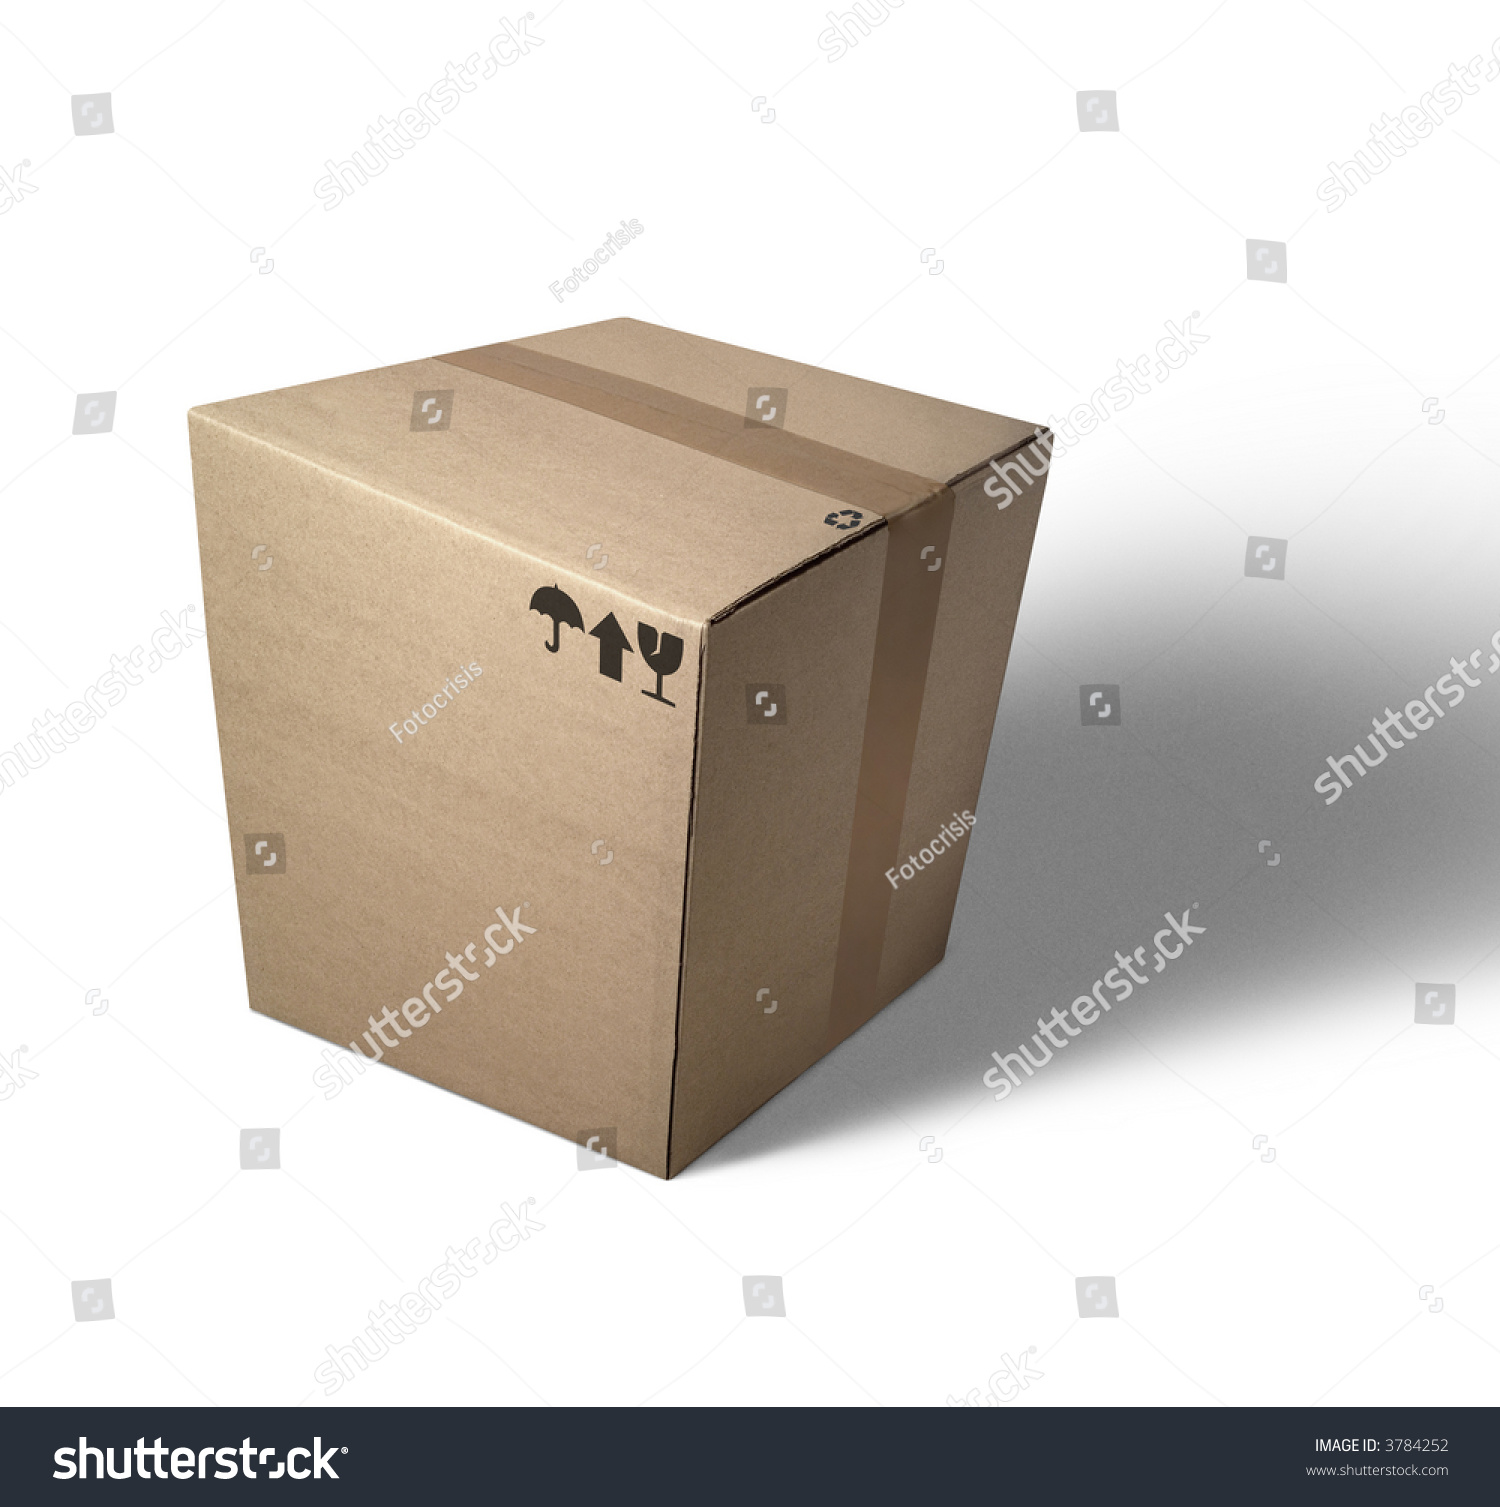 Distorted Perspective View Of A Cardboard Box Stock Photo 3784252 ...